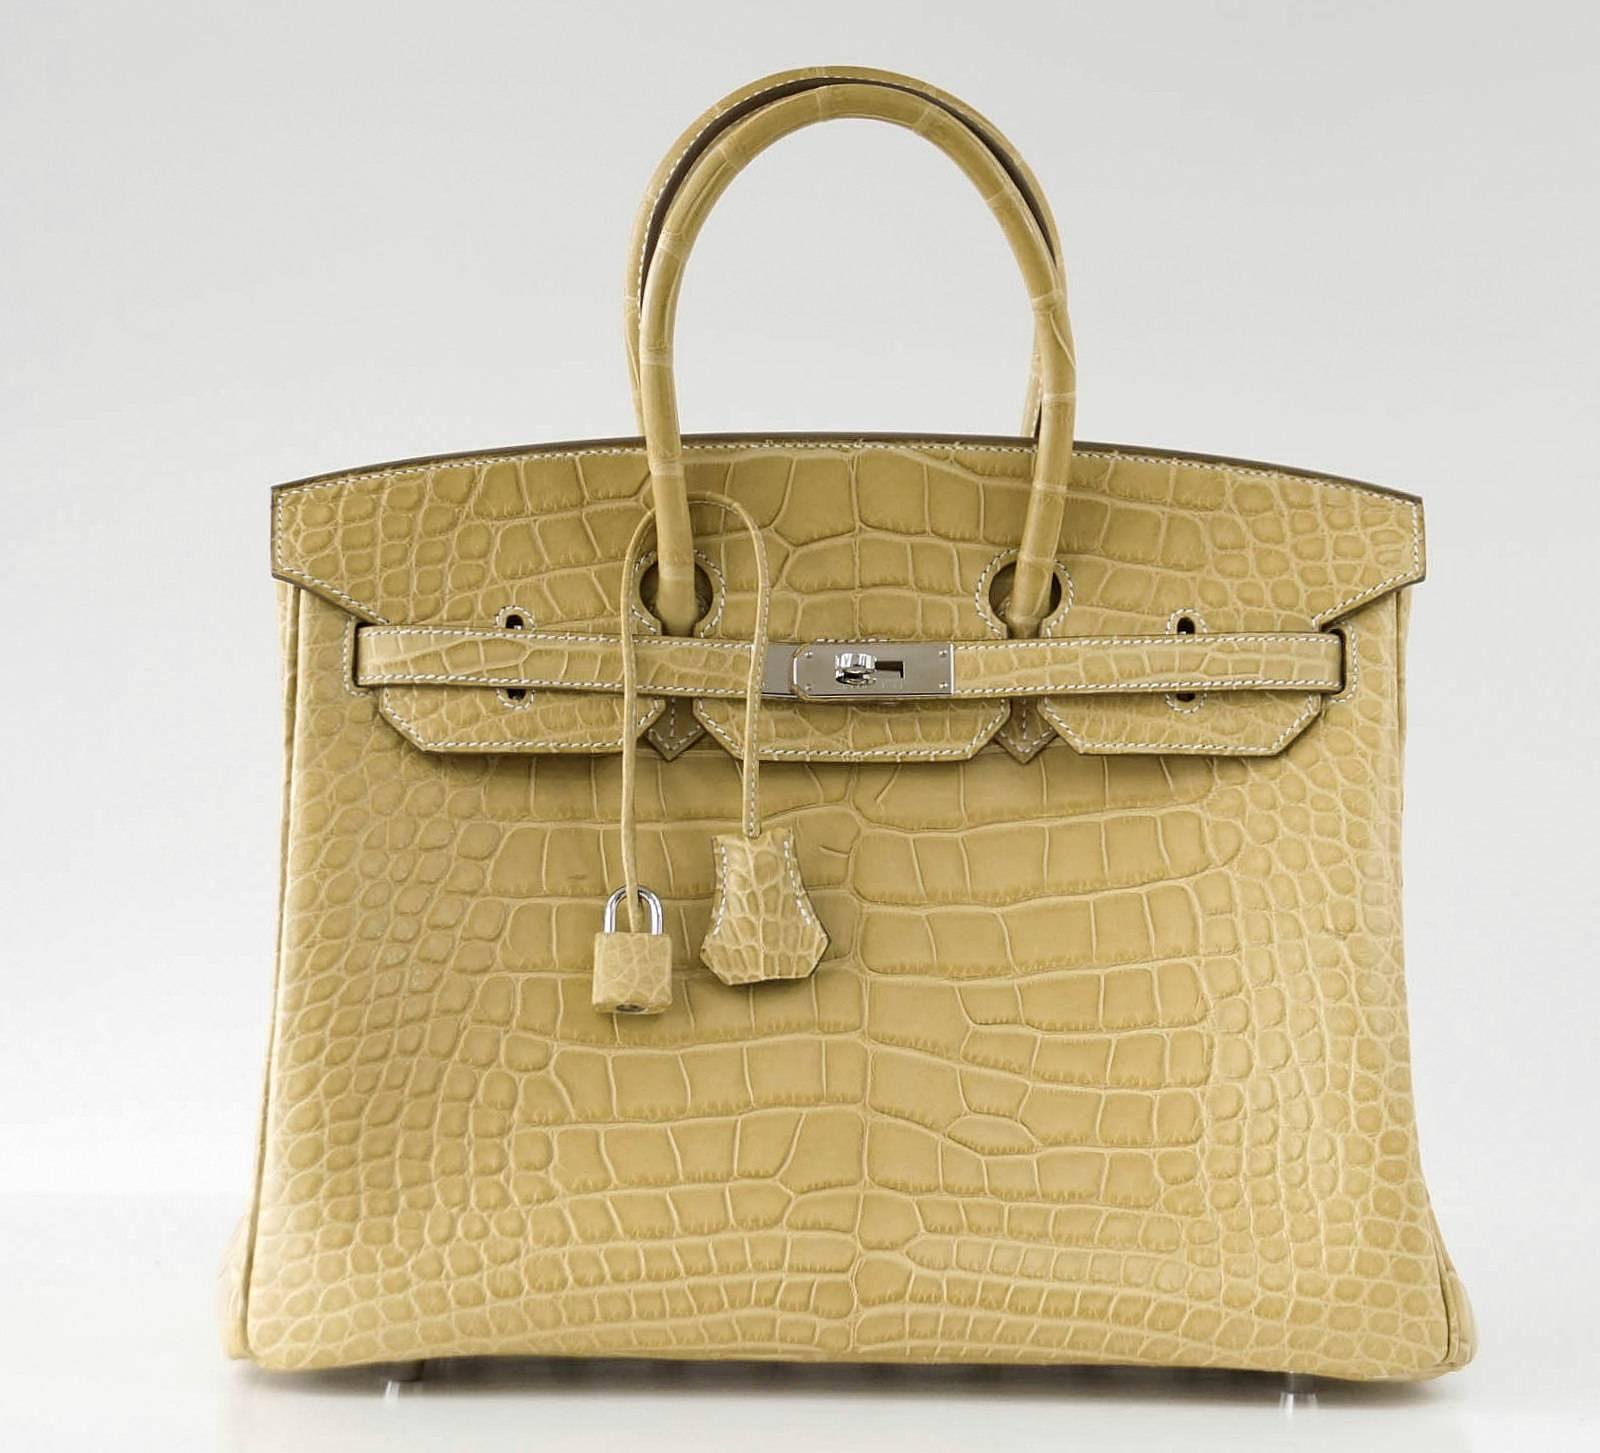 Guaranteed authentic Hermes Birkin 35 Mais matte Alligator.
This unique colour is best described as a buttery blonde beige yellow to the eye.
Fresh palladium hardware.
Front has 2 very light marks.
Carried one time. 
Plastic on feet. No markings on